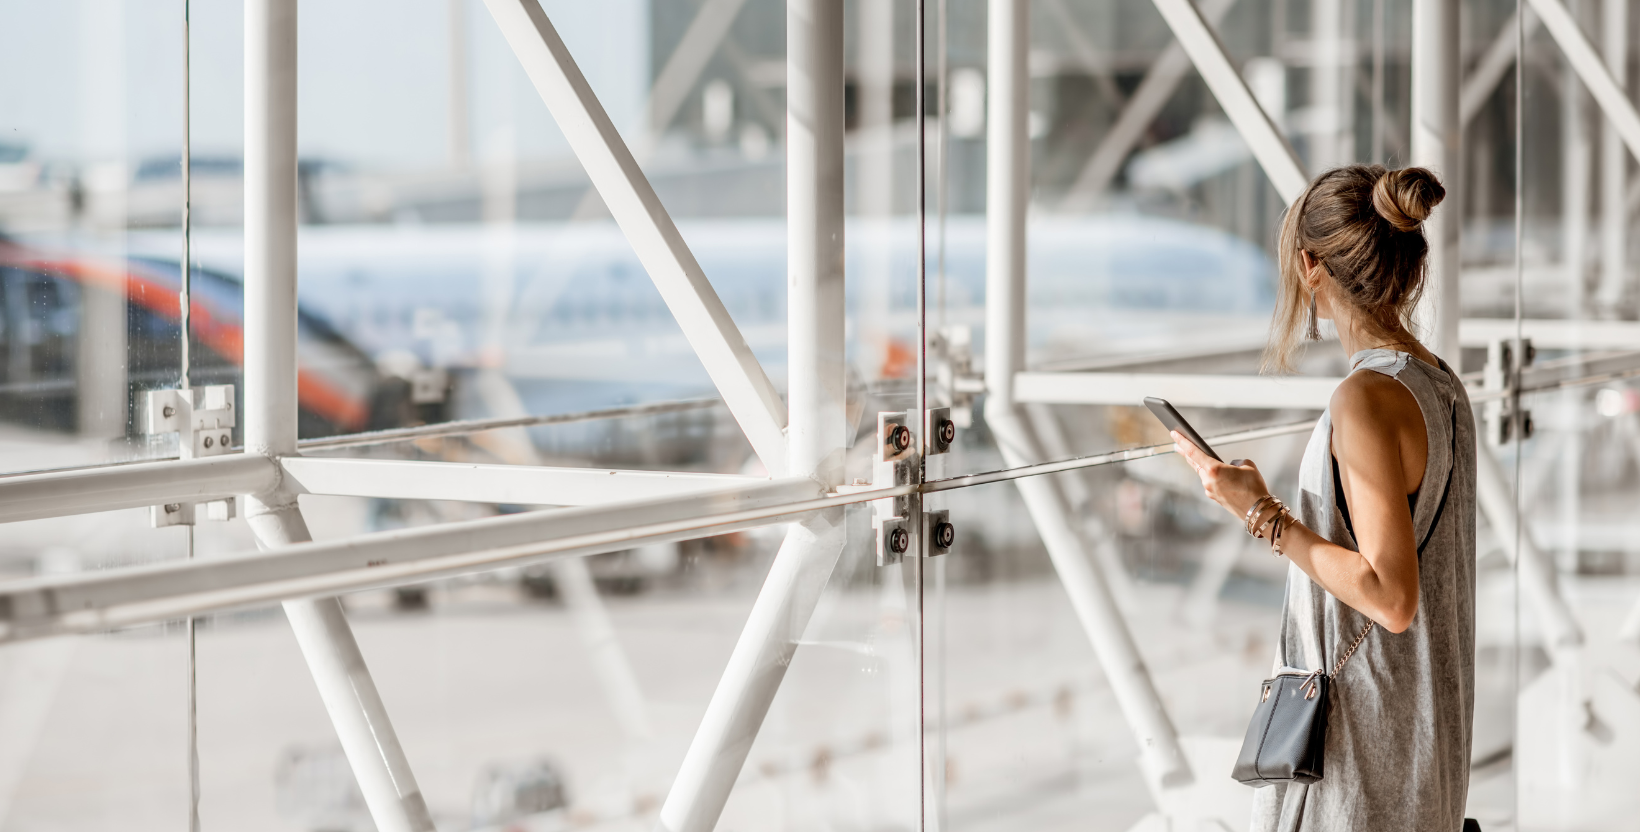 A stock image of an airport with a lady who is travelling looking out the window at the planes. The image represents travelling with a continence problem.